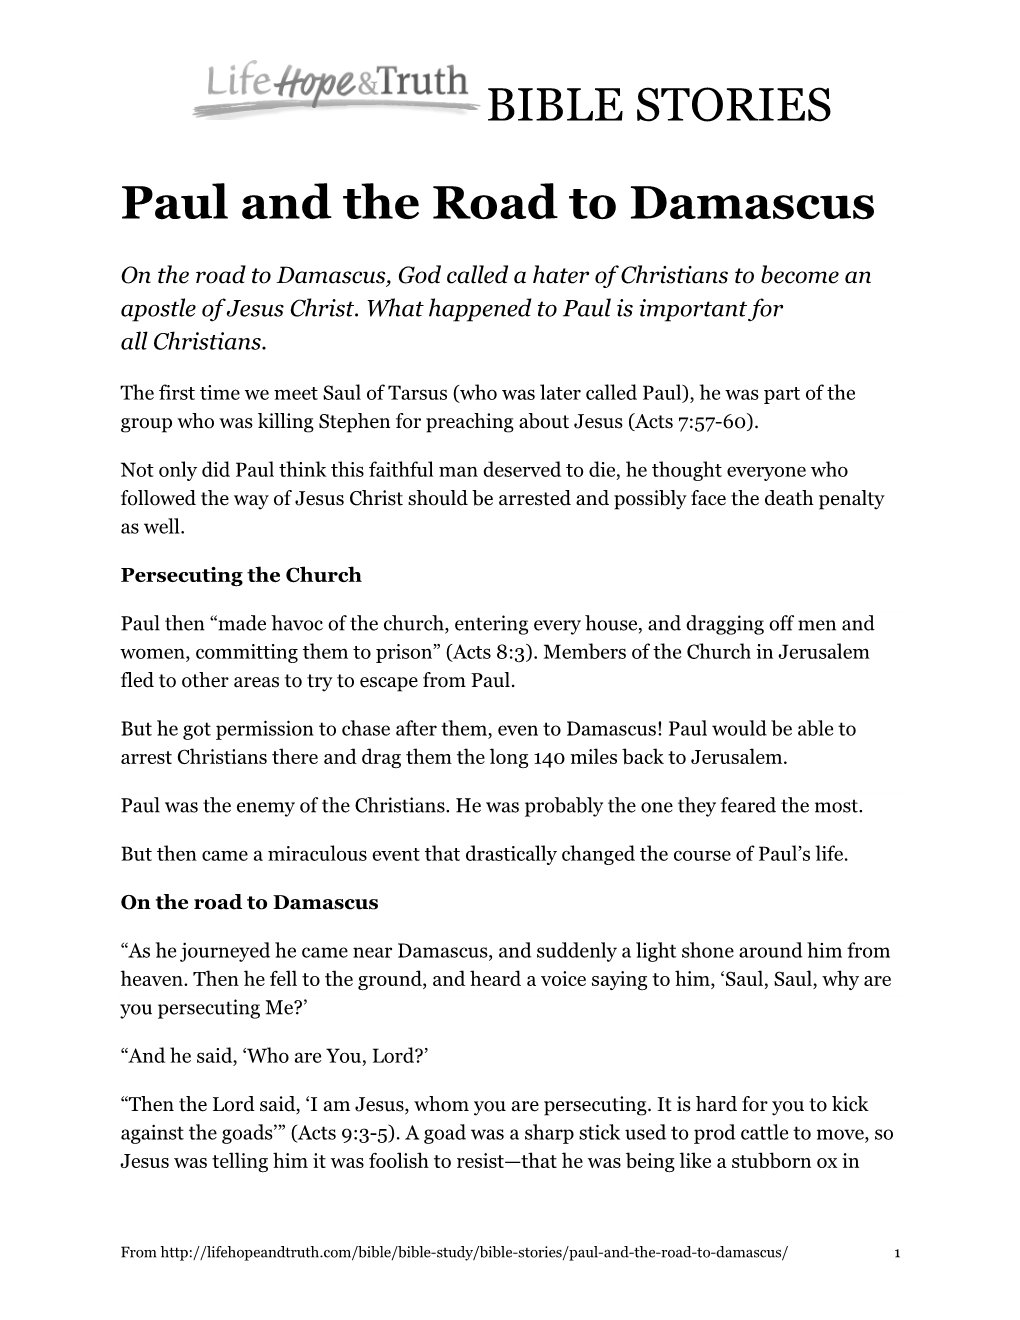 BIBLE STORIES Paul and the Road to Damascus